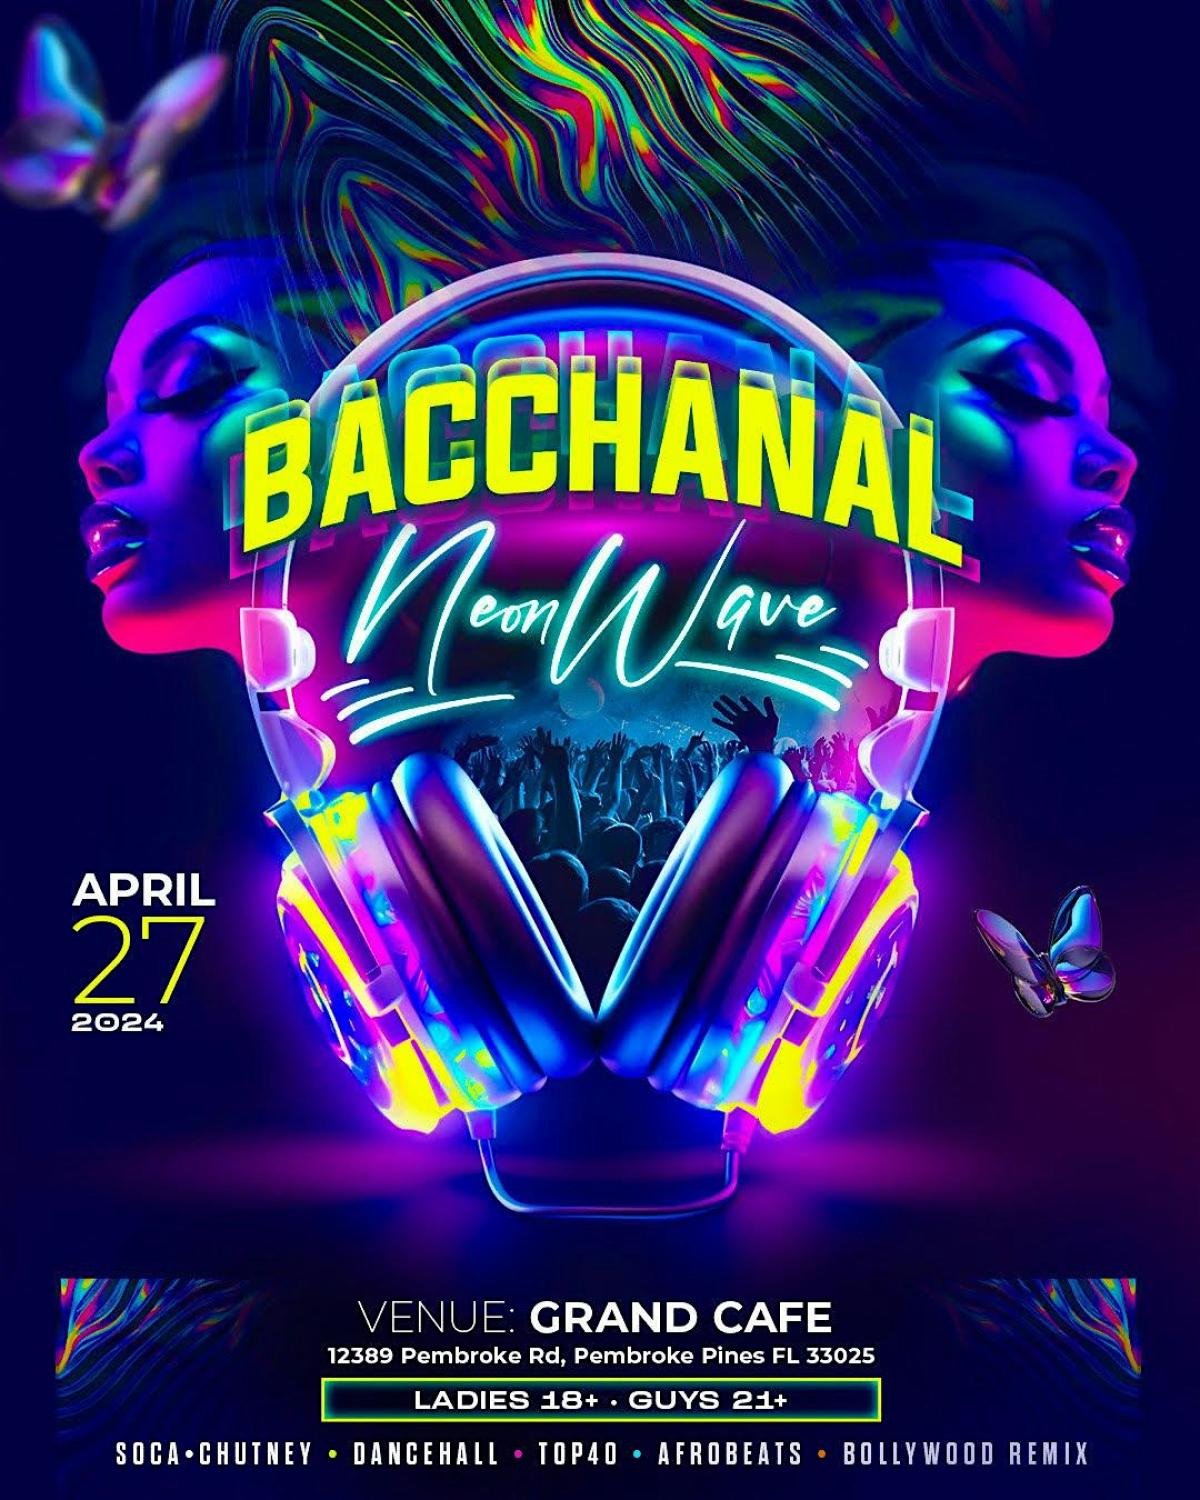 Bacchanal Neon Wave flyer or graphic.